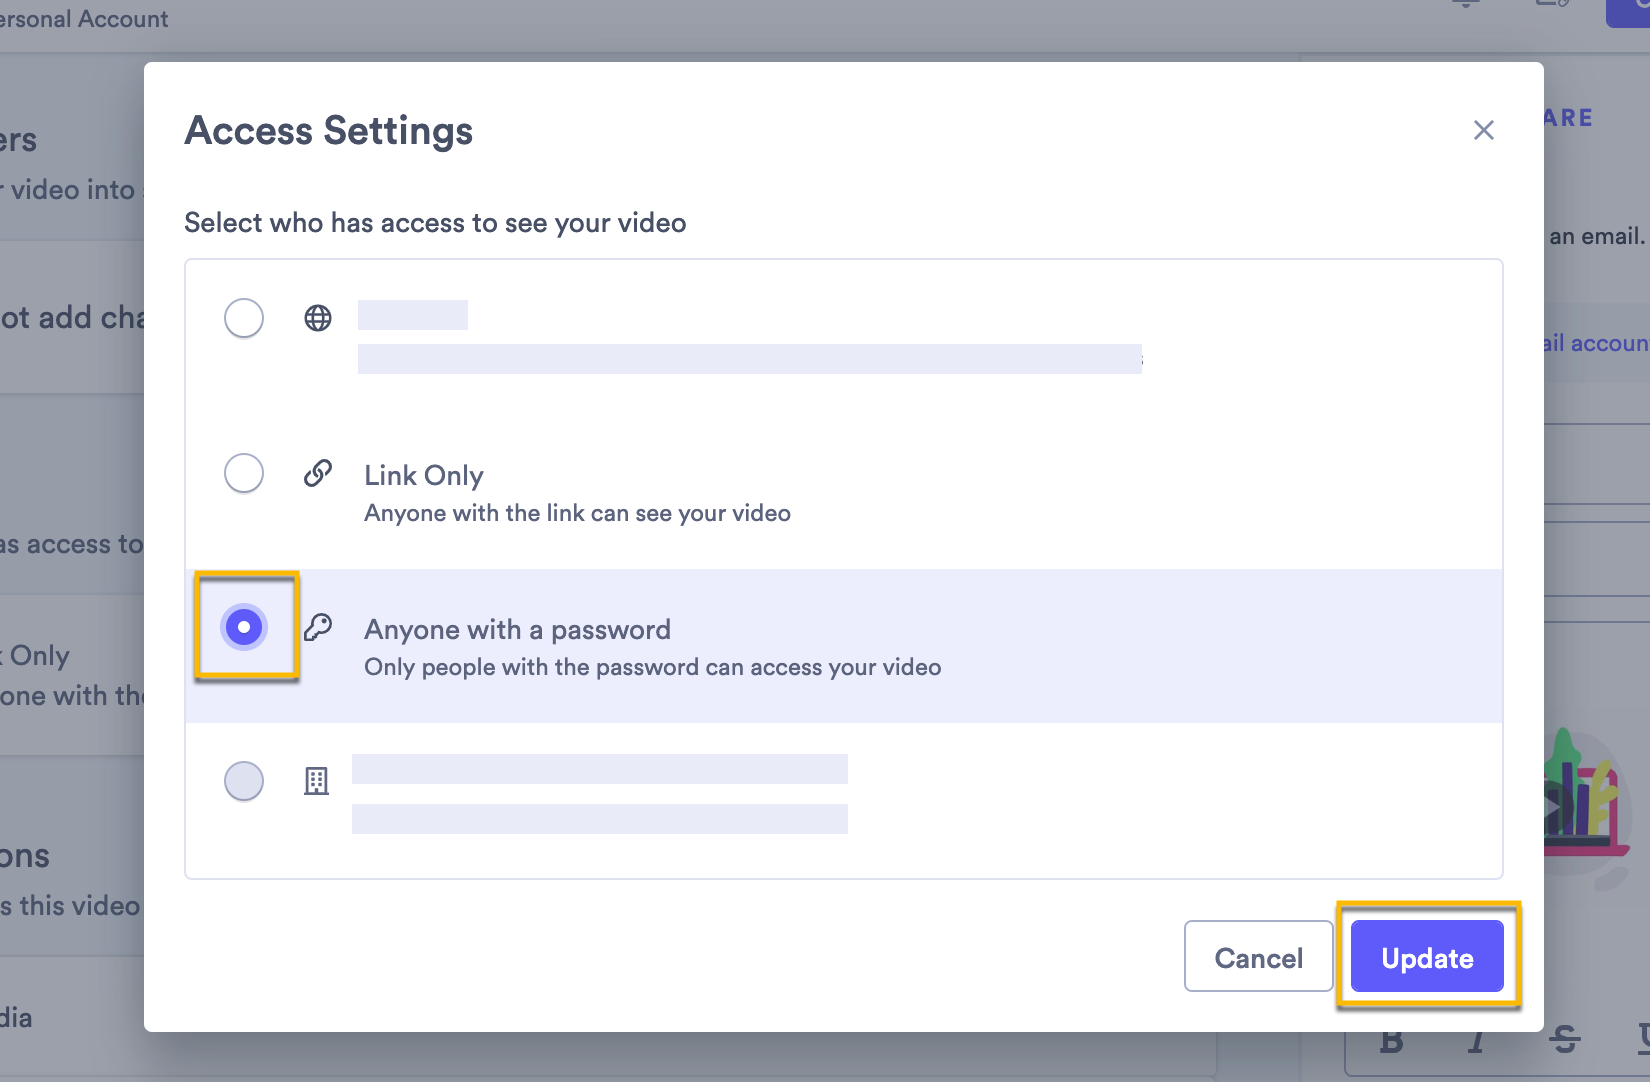 Selecting a new access setting for your video